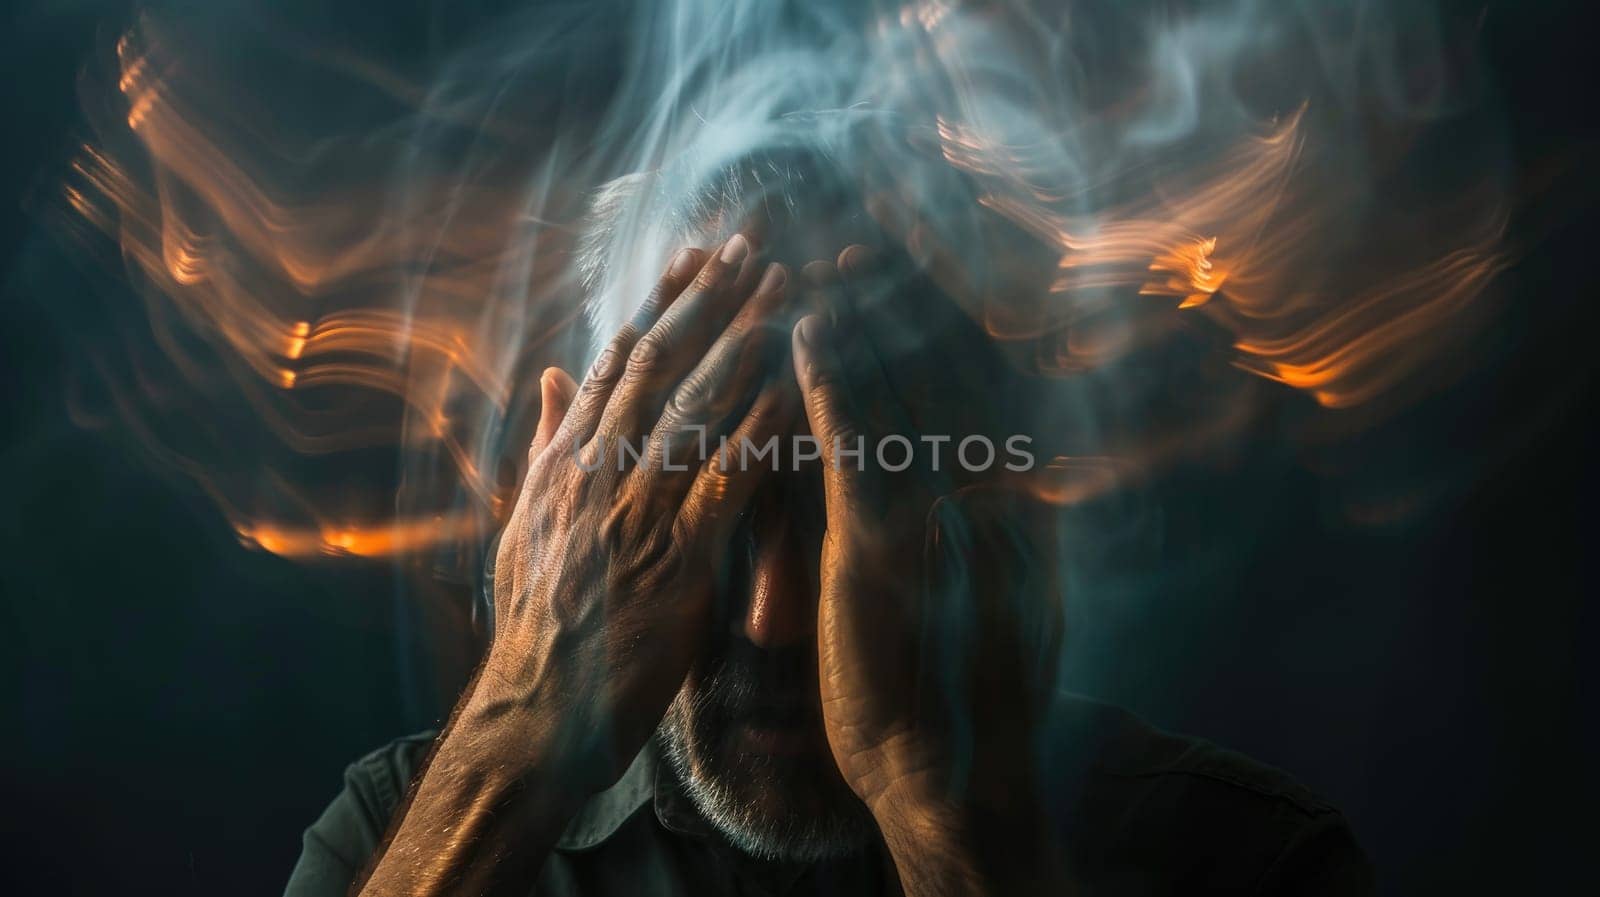 Long exposure blurry shot of a man in anxiety, Abstract young person corroding by depression or anxiety.